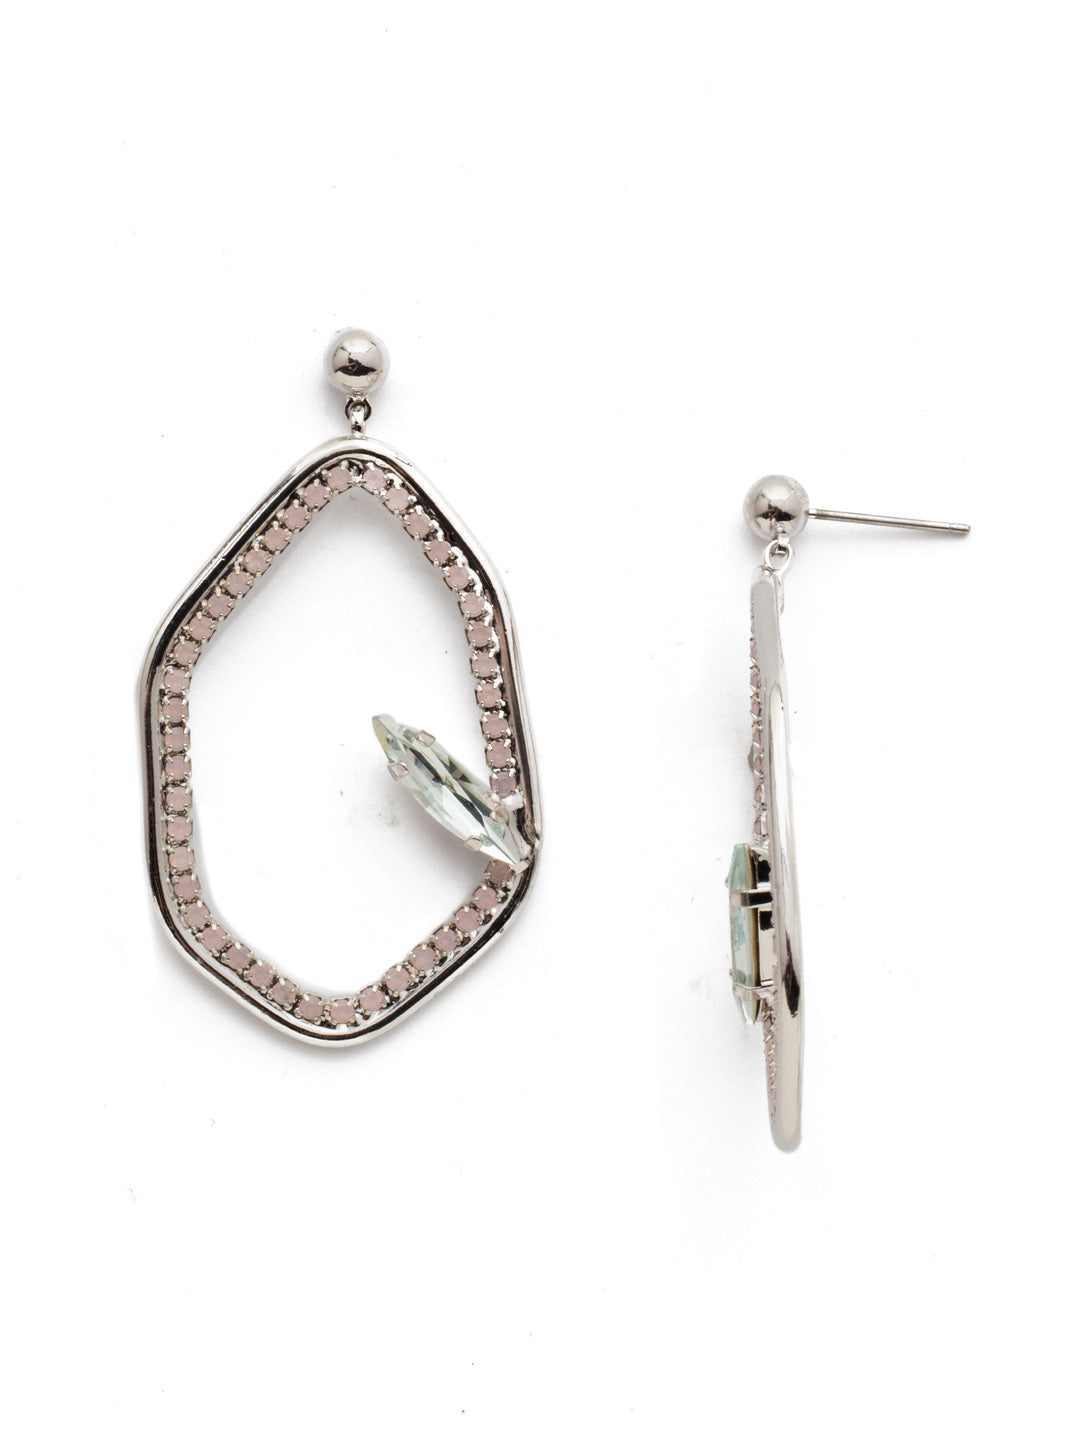 Gemma Dangle Earrings - EEH28RHTUL - <p>These posts are long on style. Fasten on the fun shape surrounded by sparkling crystal pieces and you're sure to be the center of attention. From Sorrelli's Tulip collection in our Palladium Silver-tone finish.</p>